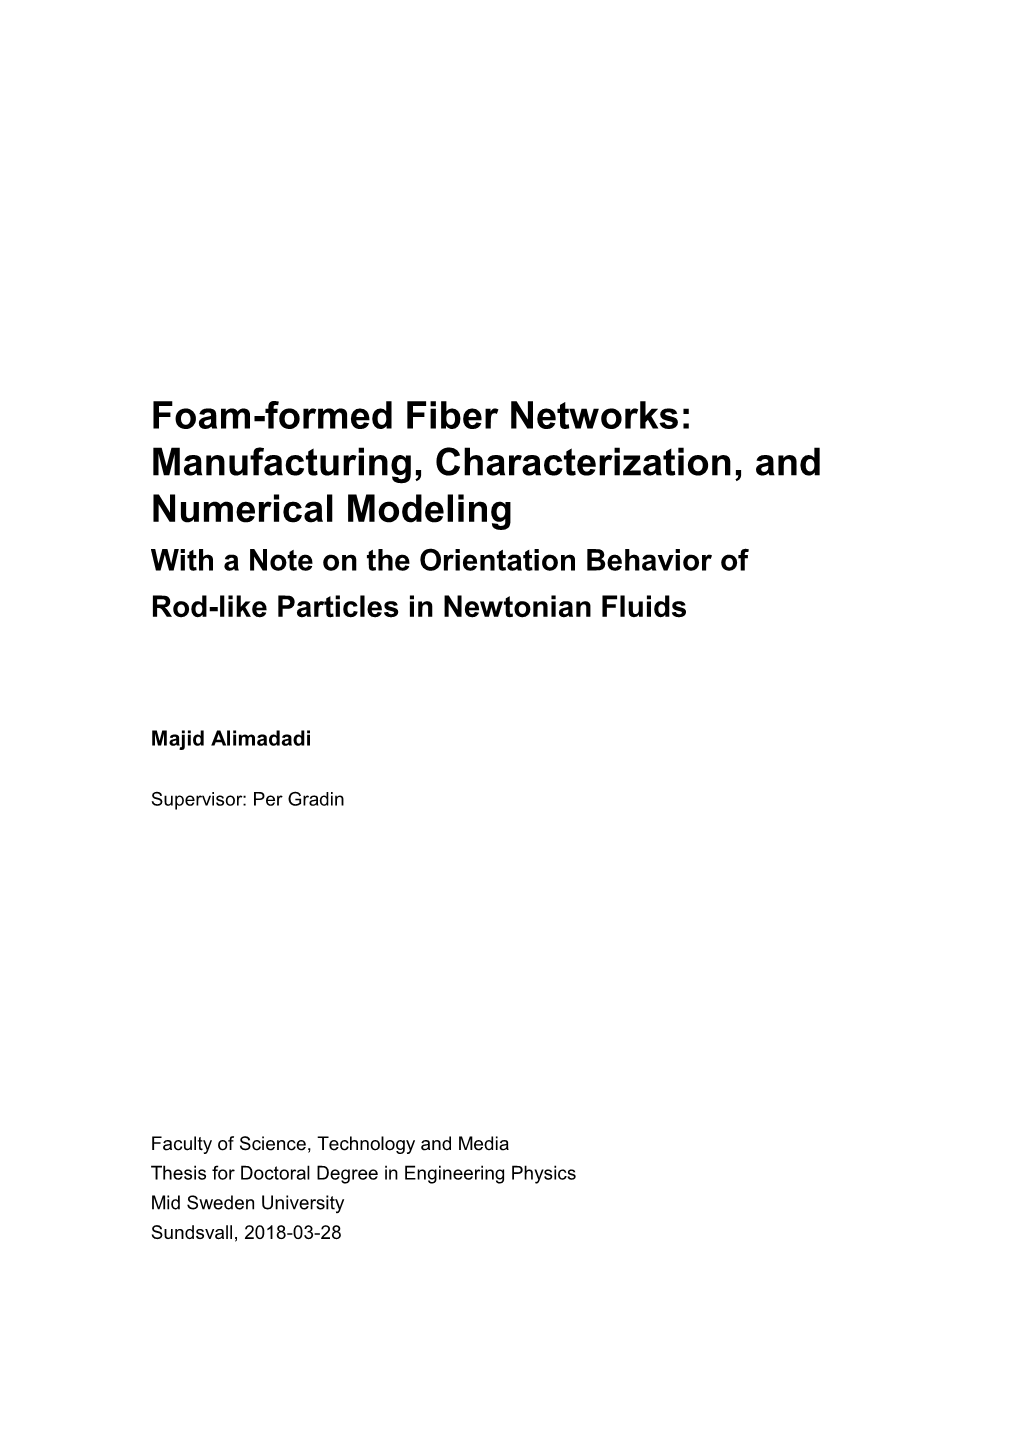 Foam-Formed Fiber Networks: Manufacturing, Characterization, and Numerical Modeling with a Note on the Orientation Behavior of Rod-Like Particles in Newtonian Fluids